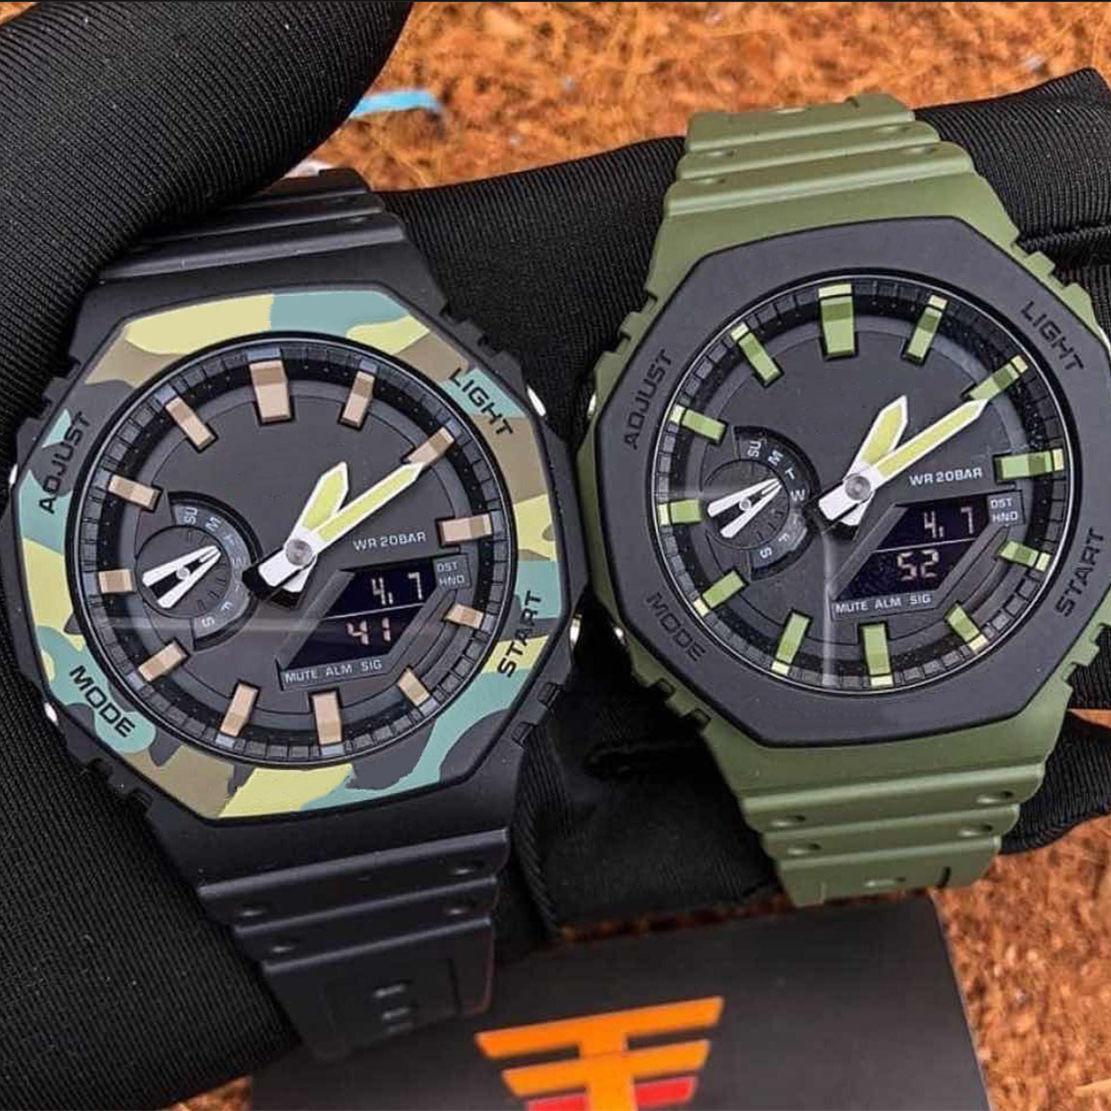 

Hot sale sports leisure quartz 2100 watch cold light waterproof digital men's LED watch high quality all functions can be operated